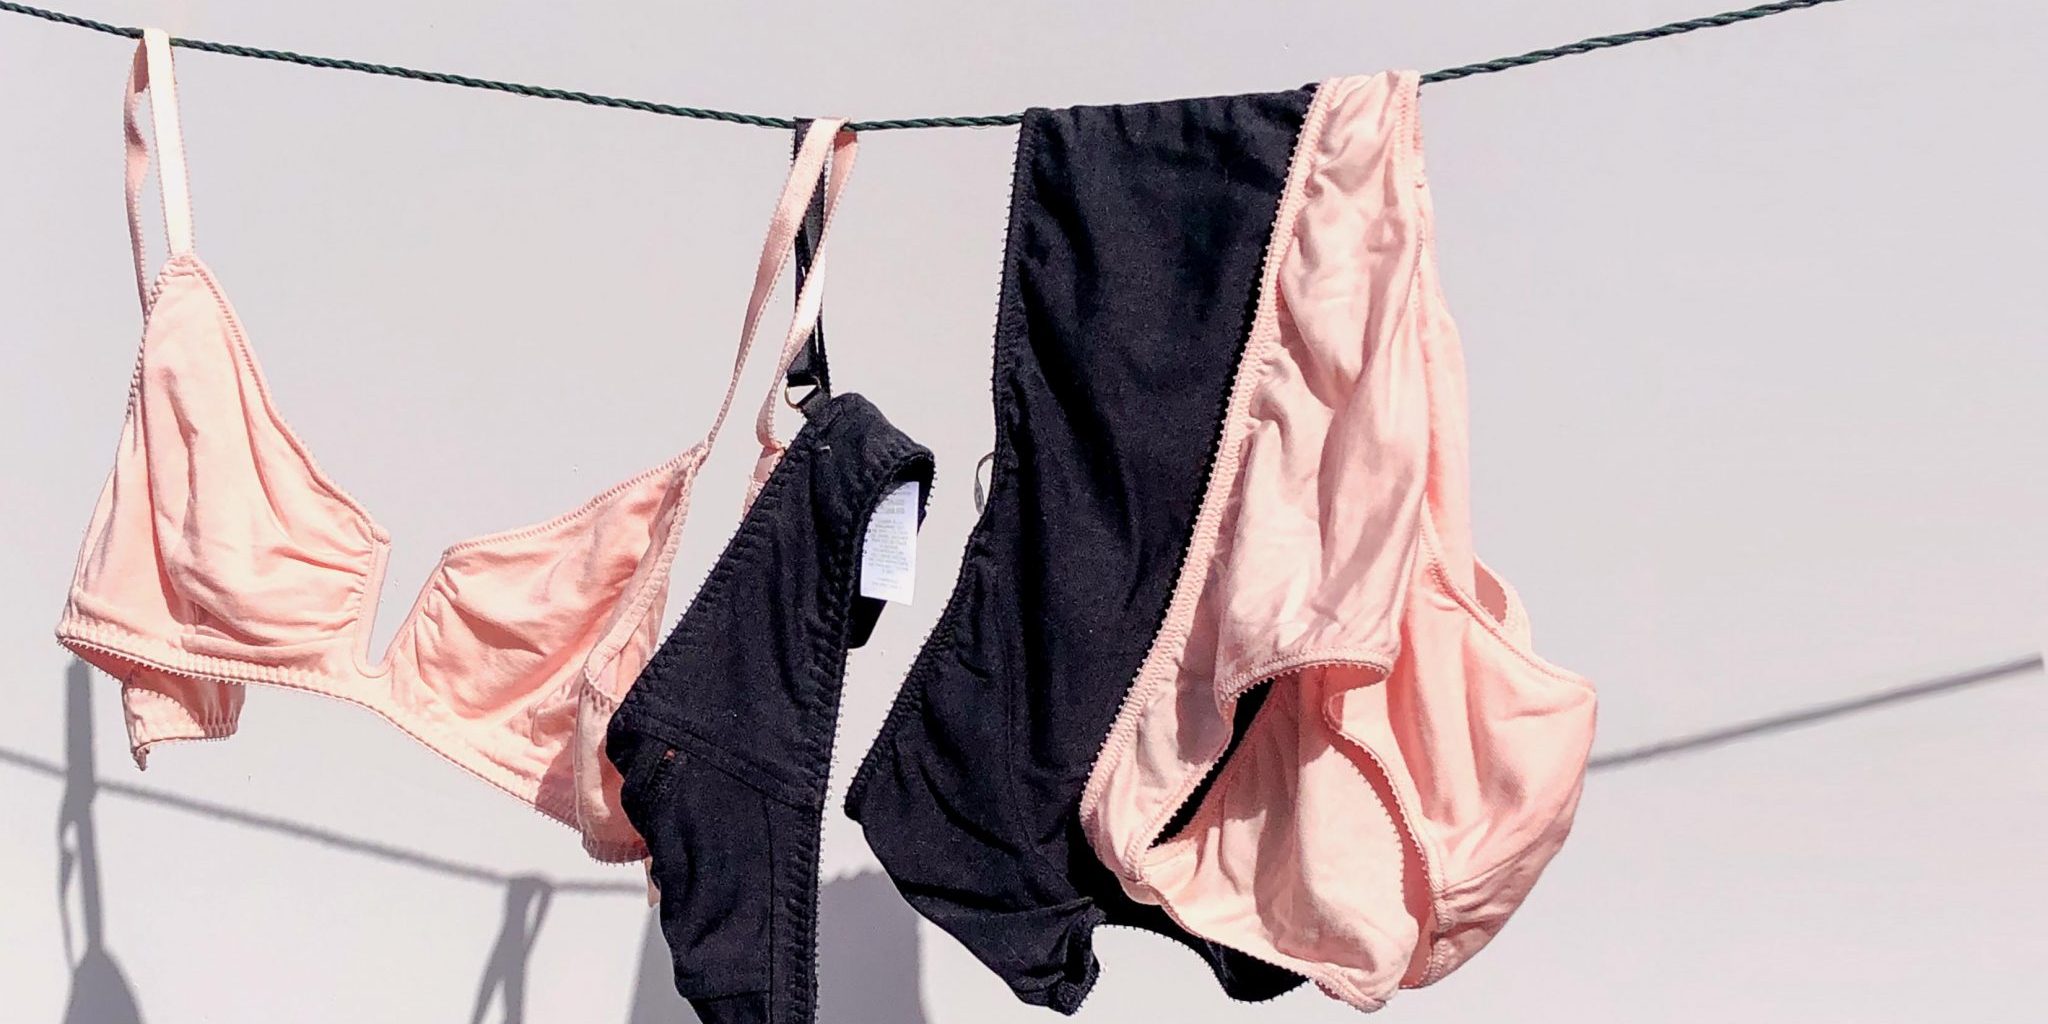 Molke: Body Positive, Ethical and Sustainable Underwear. Interview